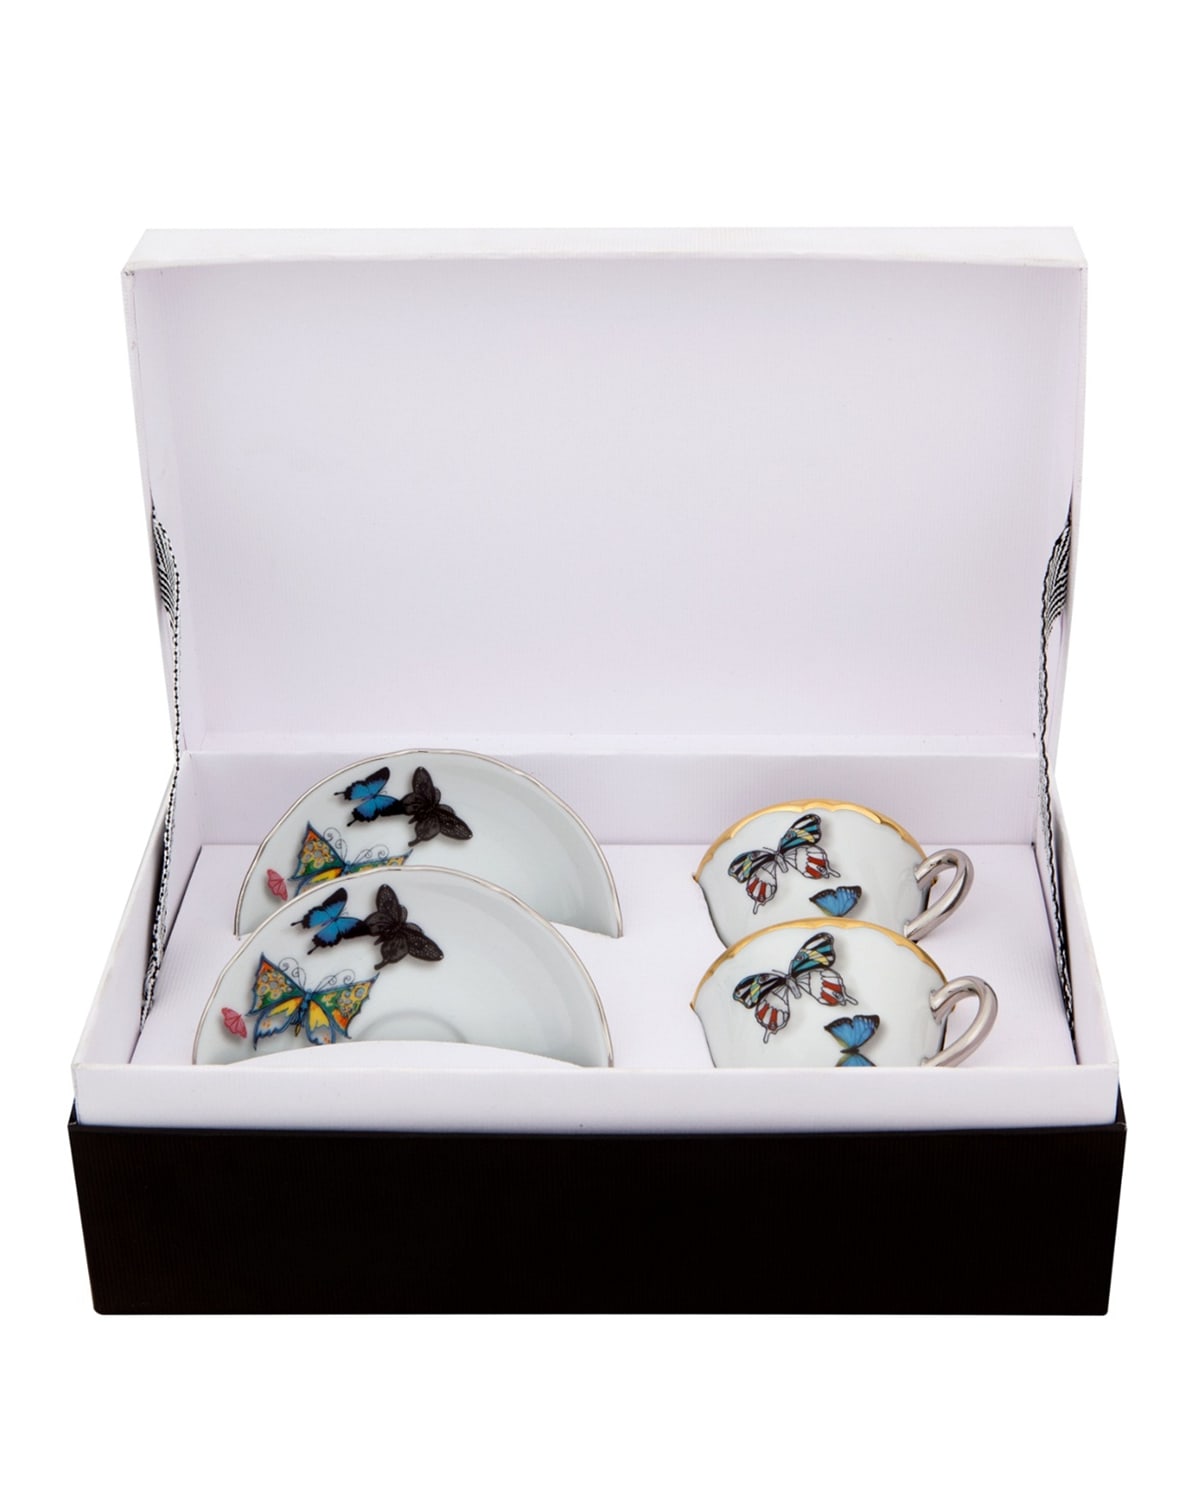 Image Christian LaCroix X Vista Alegre Butterfly Parade Espresso/Coffee Cups & Saucers, Set of 2